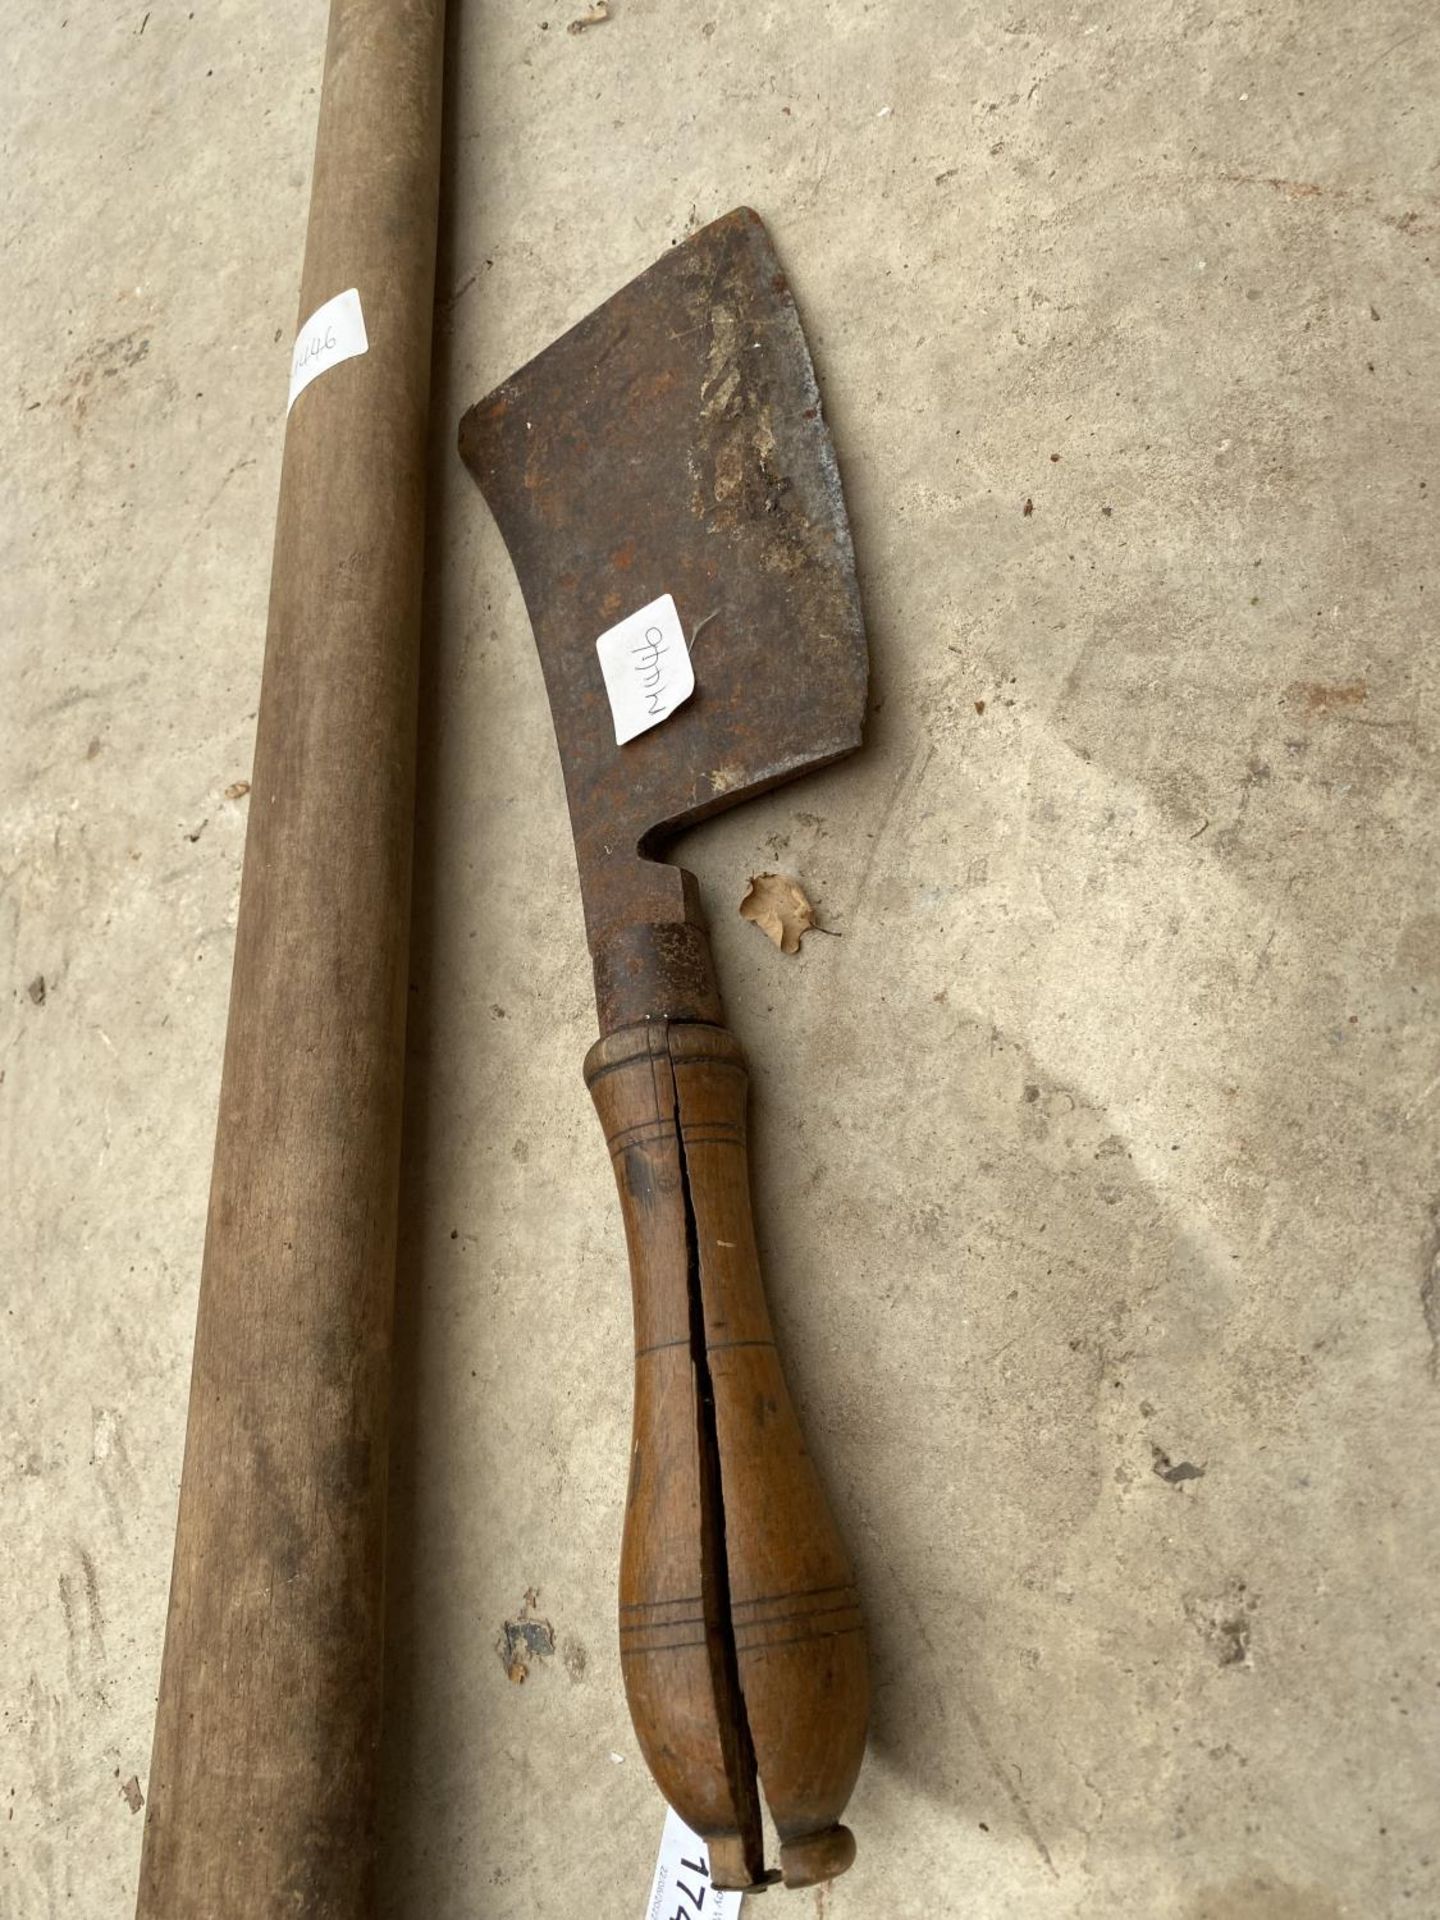 A VINTAGE PICK AXE AND MEAT CLEAVER - Image 2 of 3